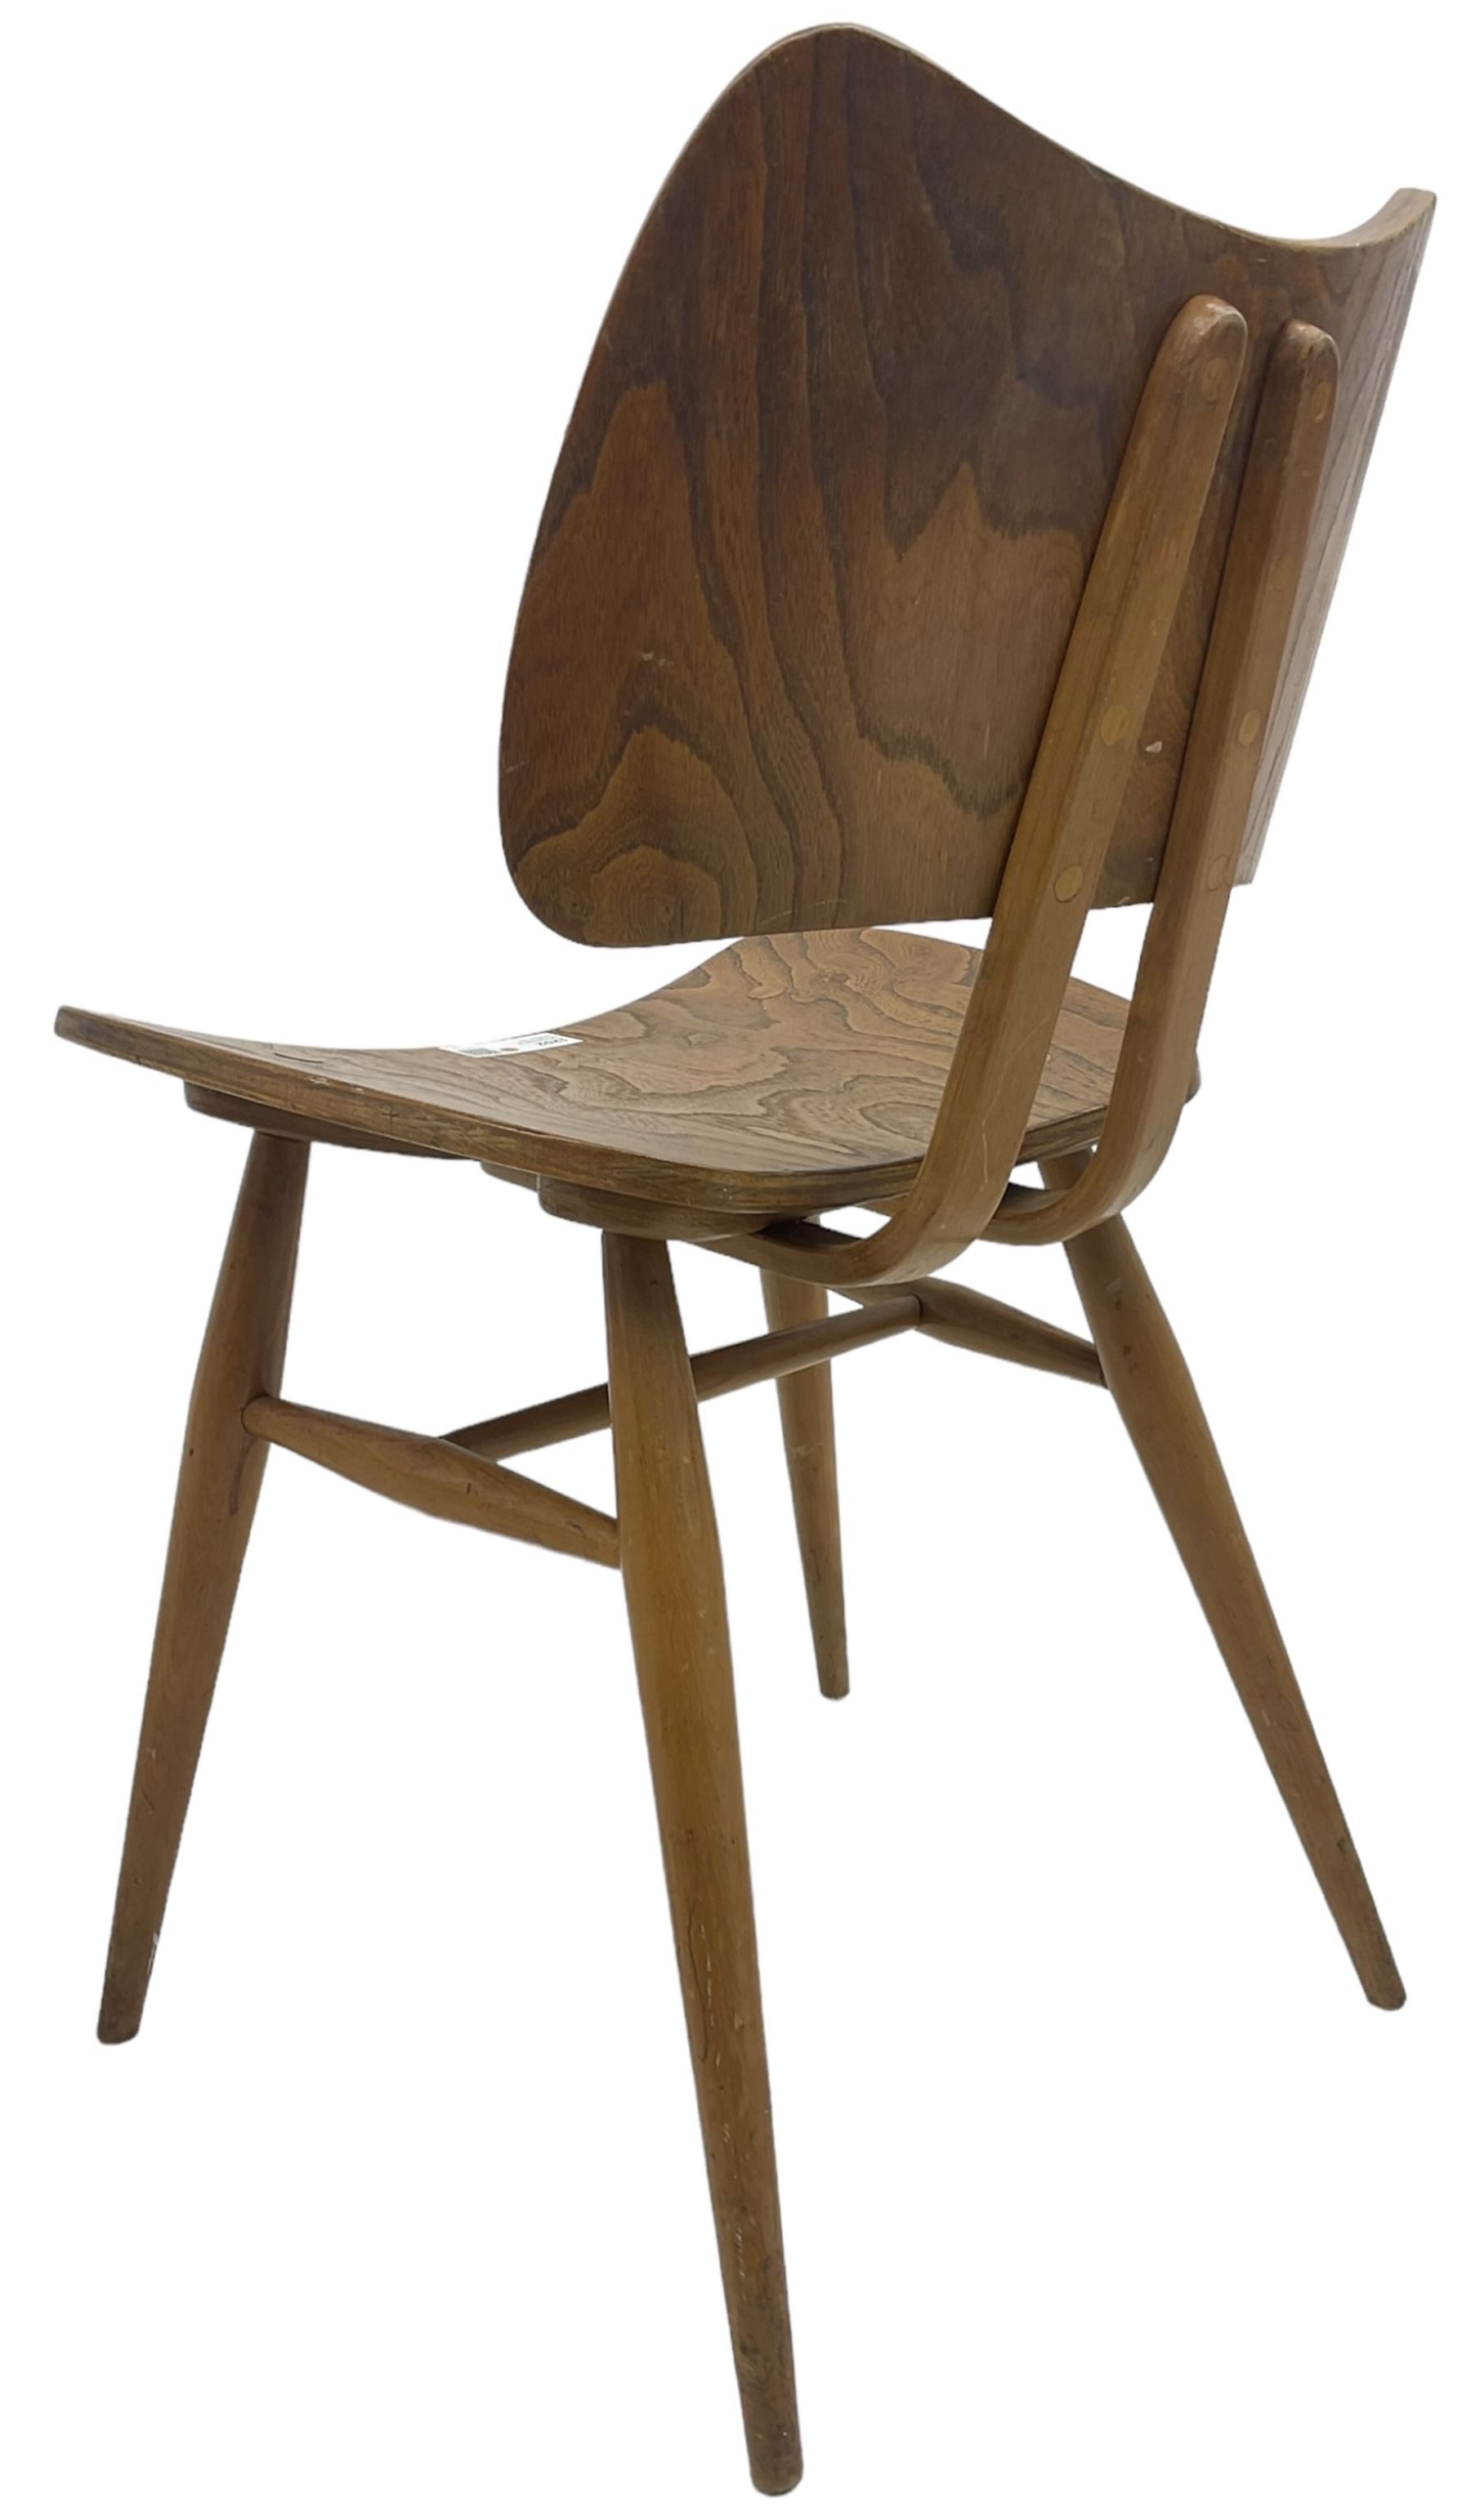 Lucian Ercolani - set of four ercol elm and beech model '401' dining chairs - Image 12 of 42